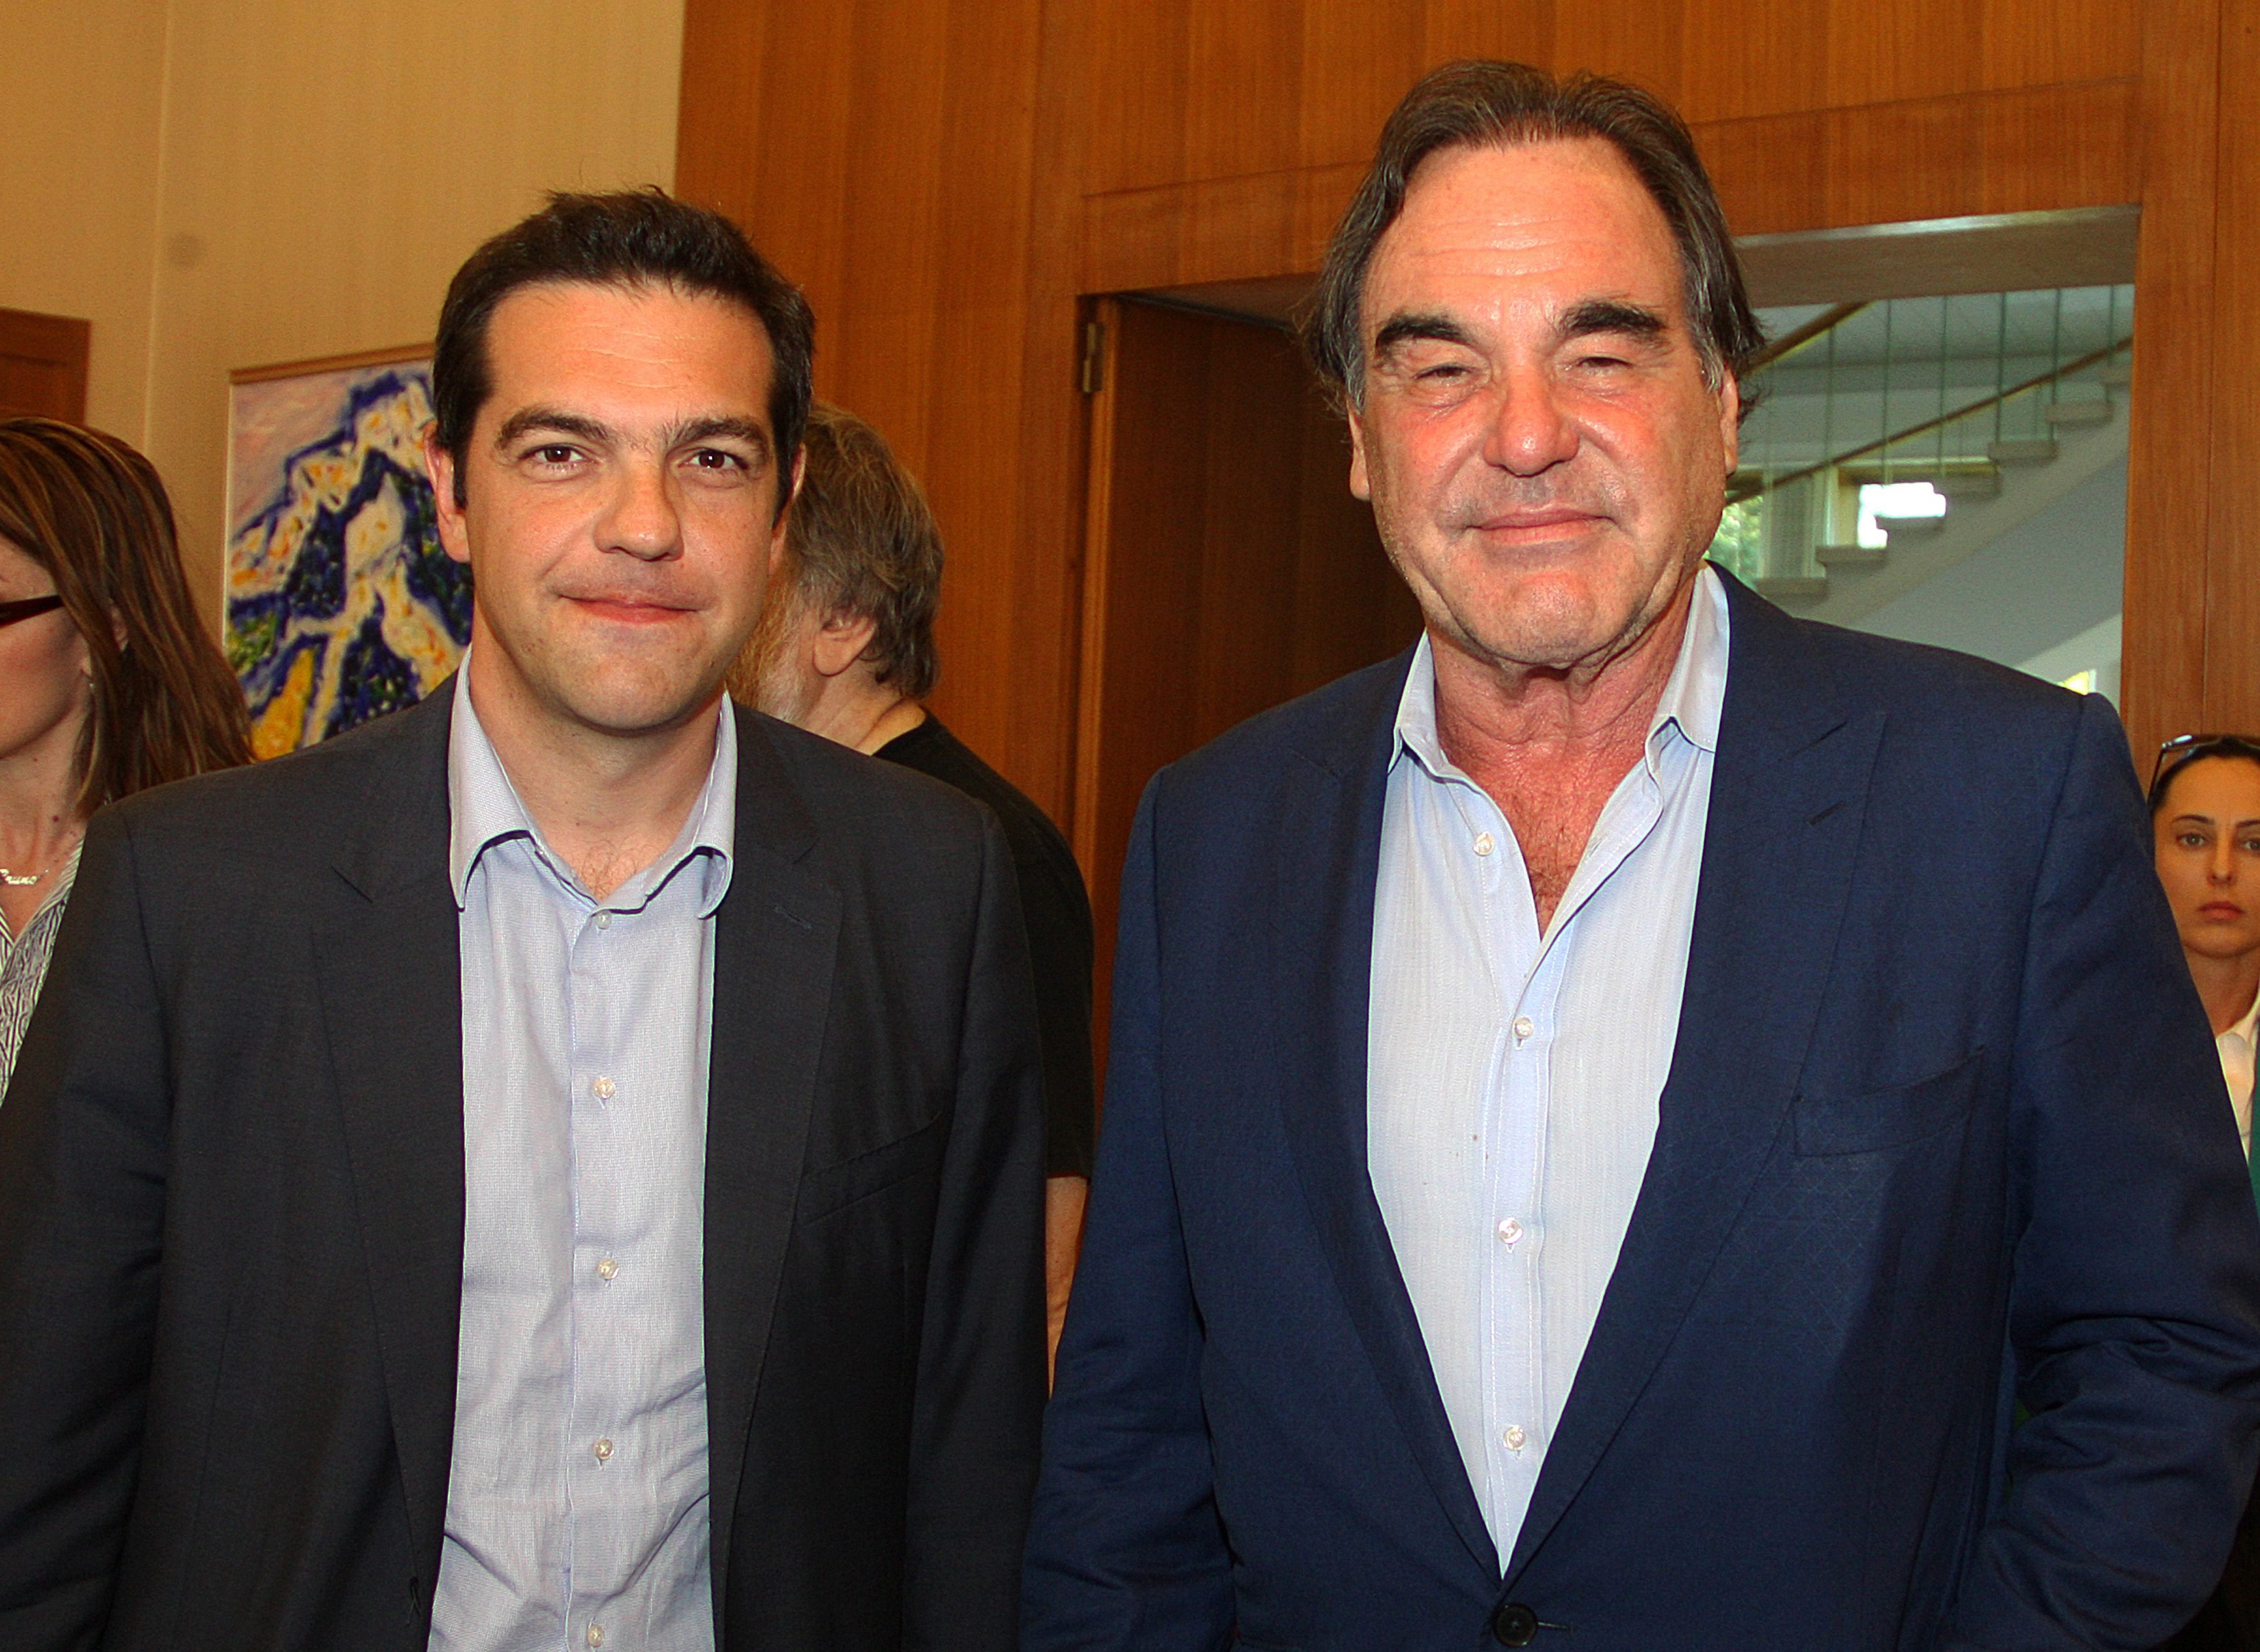 Tsipras, the hope of Greece, Europe and rest of world?